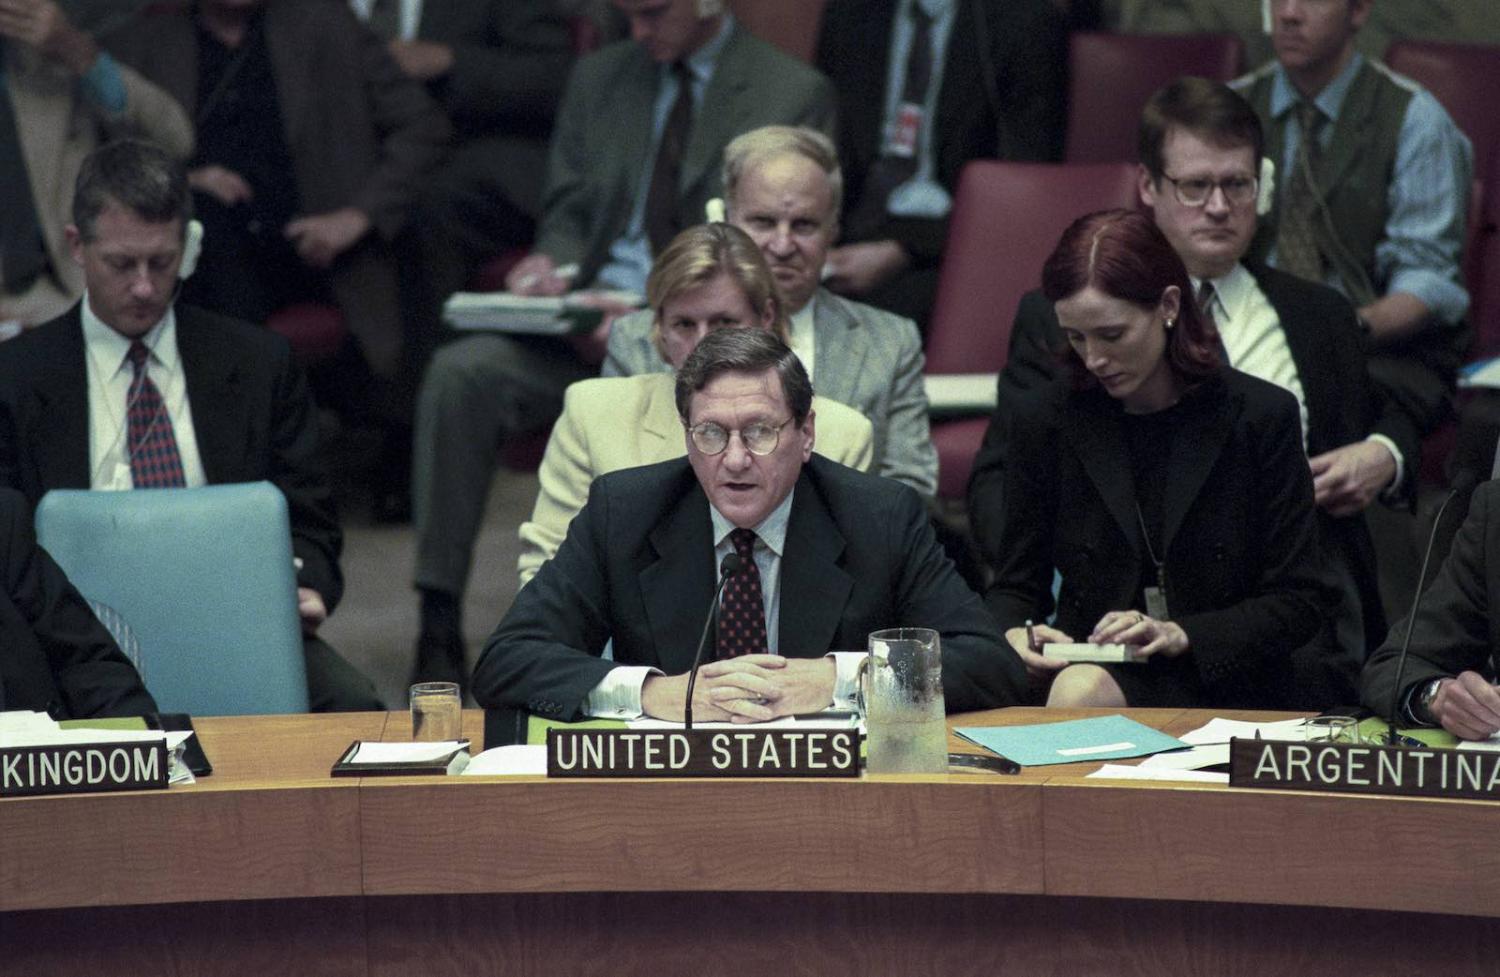 Richard Holbrooke, as Permanent Representative of the United States to the United Nations, addresses the Security Council during the 1999 East Timor crisis (Photo: Evan Schneider/UN Photo)